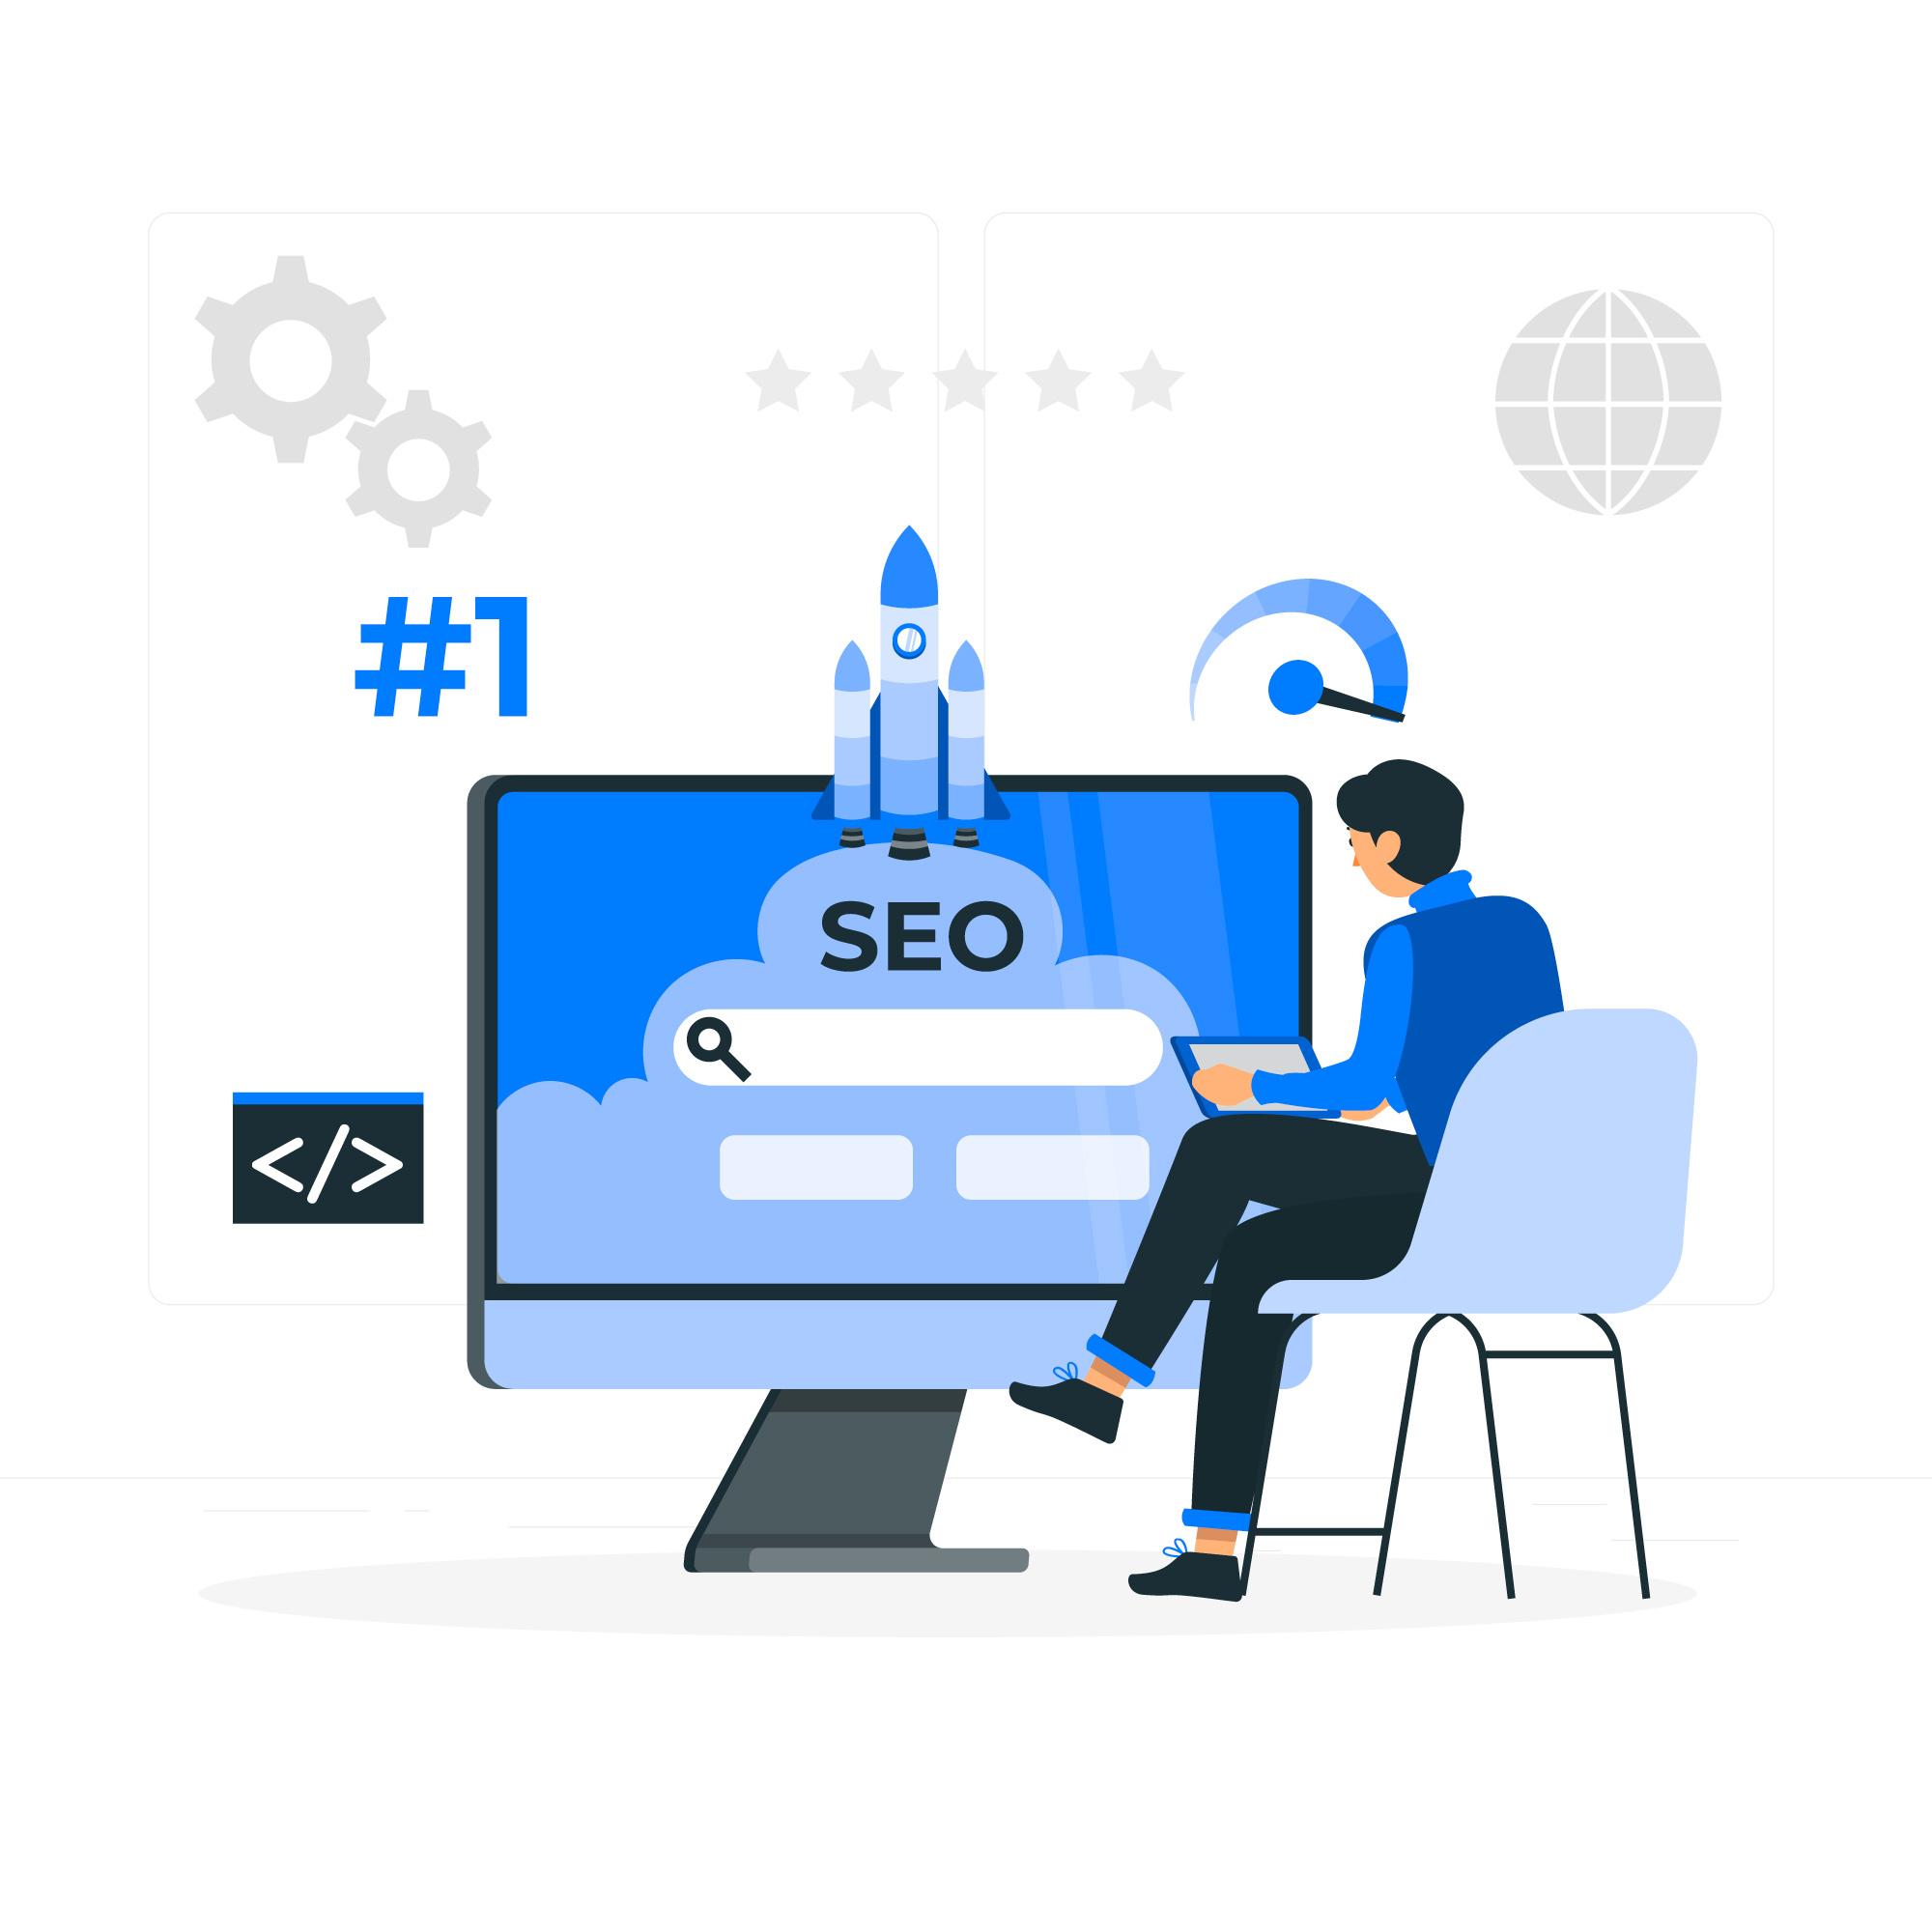 What is seo? what does seo stand for?